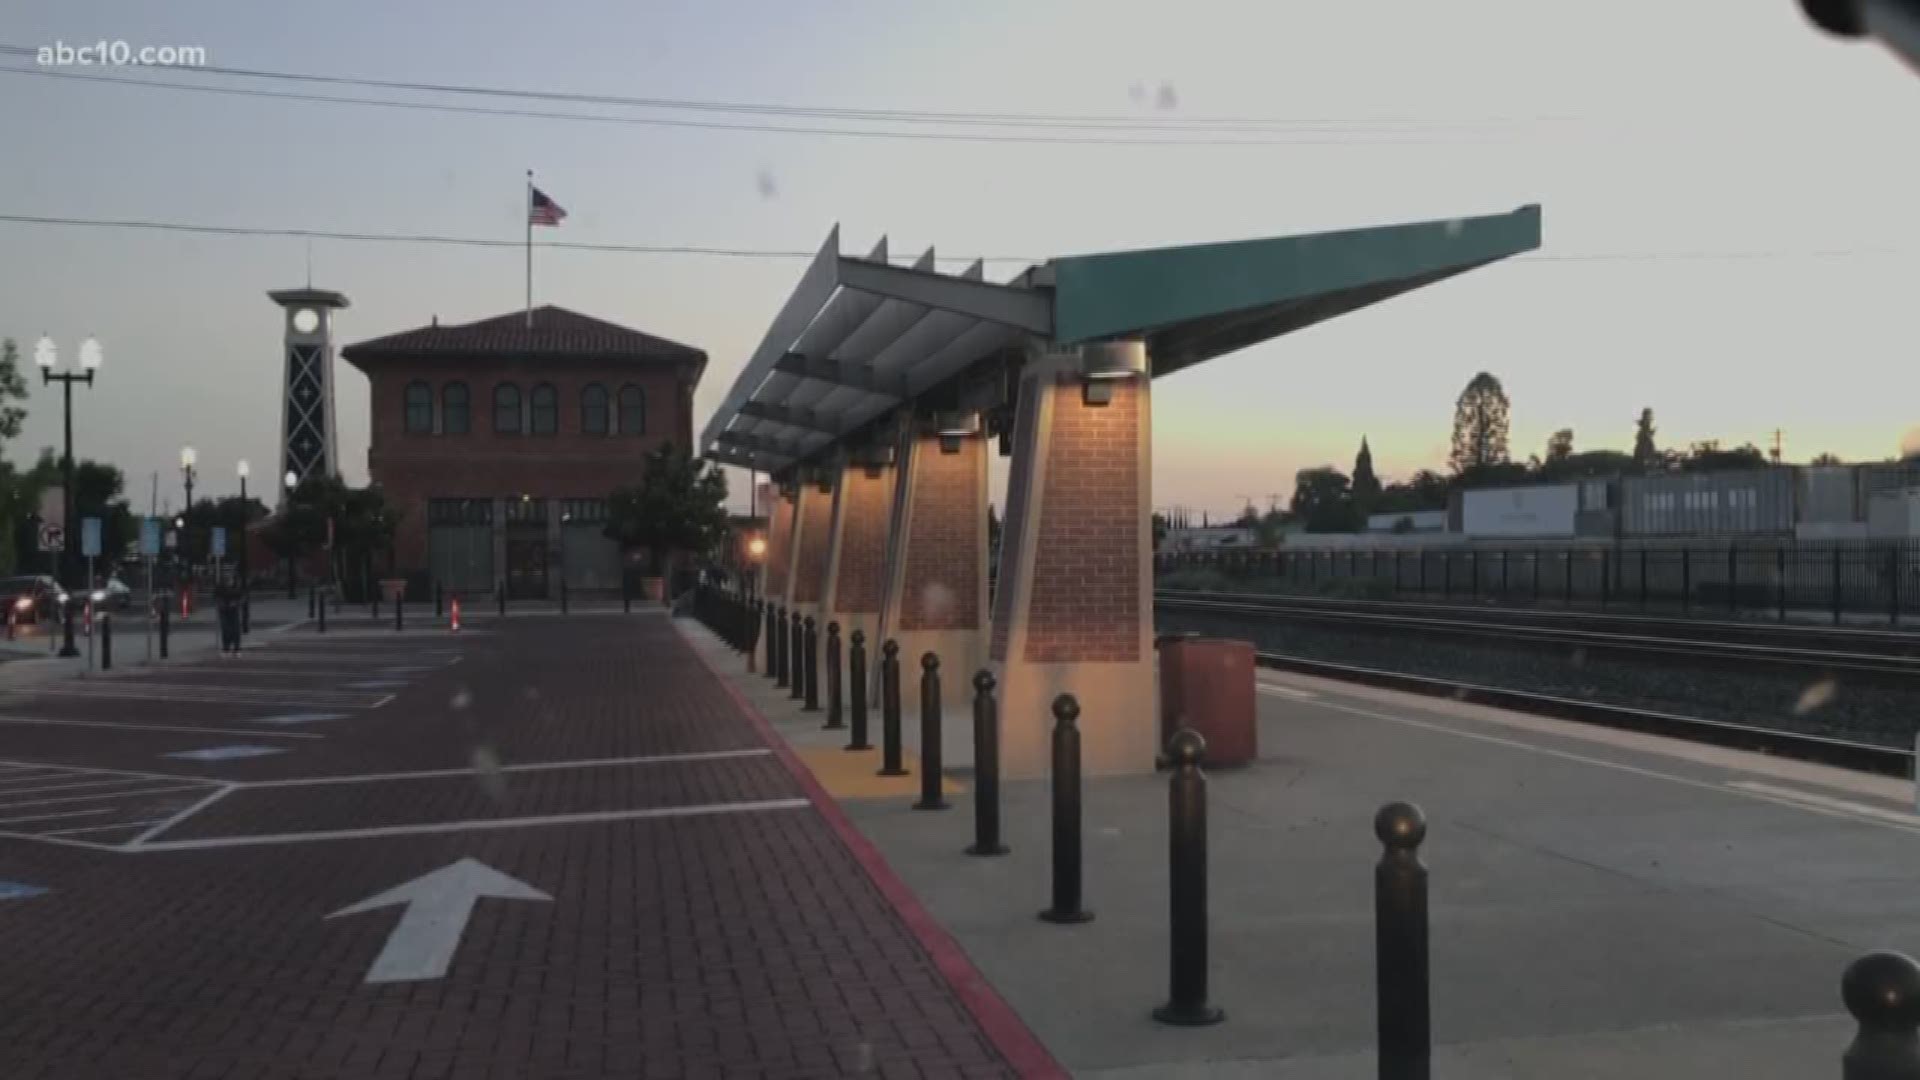 All Altimont Corridor Express Trains connecting the Central Valley to the Bay Area have been canceled Thursday because of a "major gas leak," officials confirmed to ABC10.